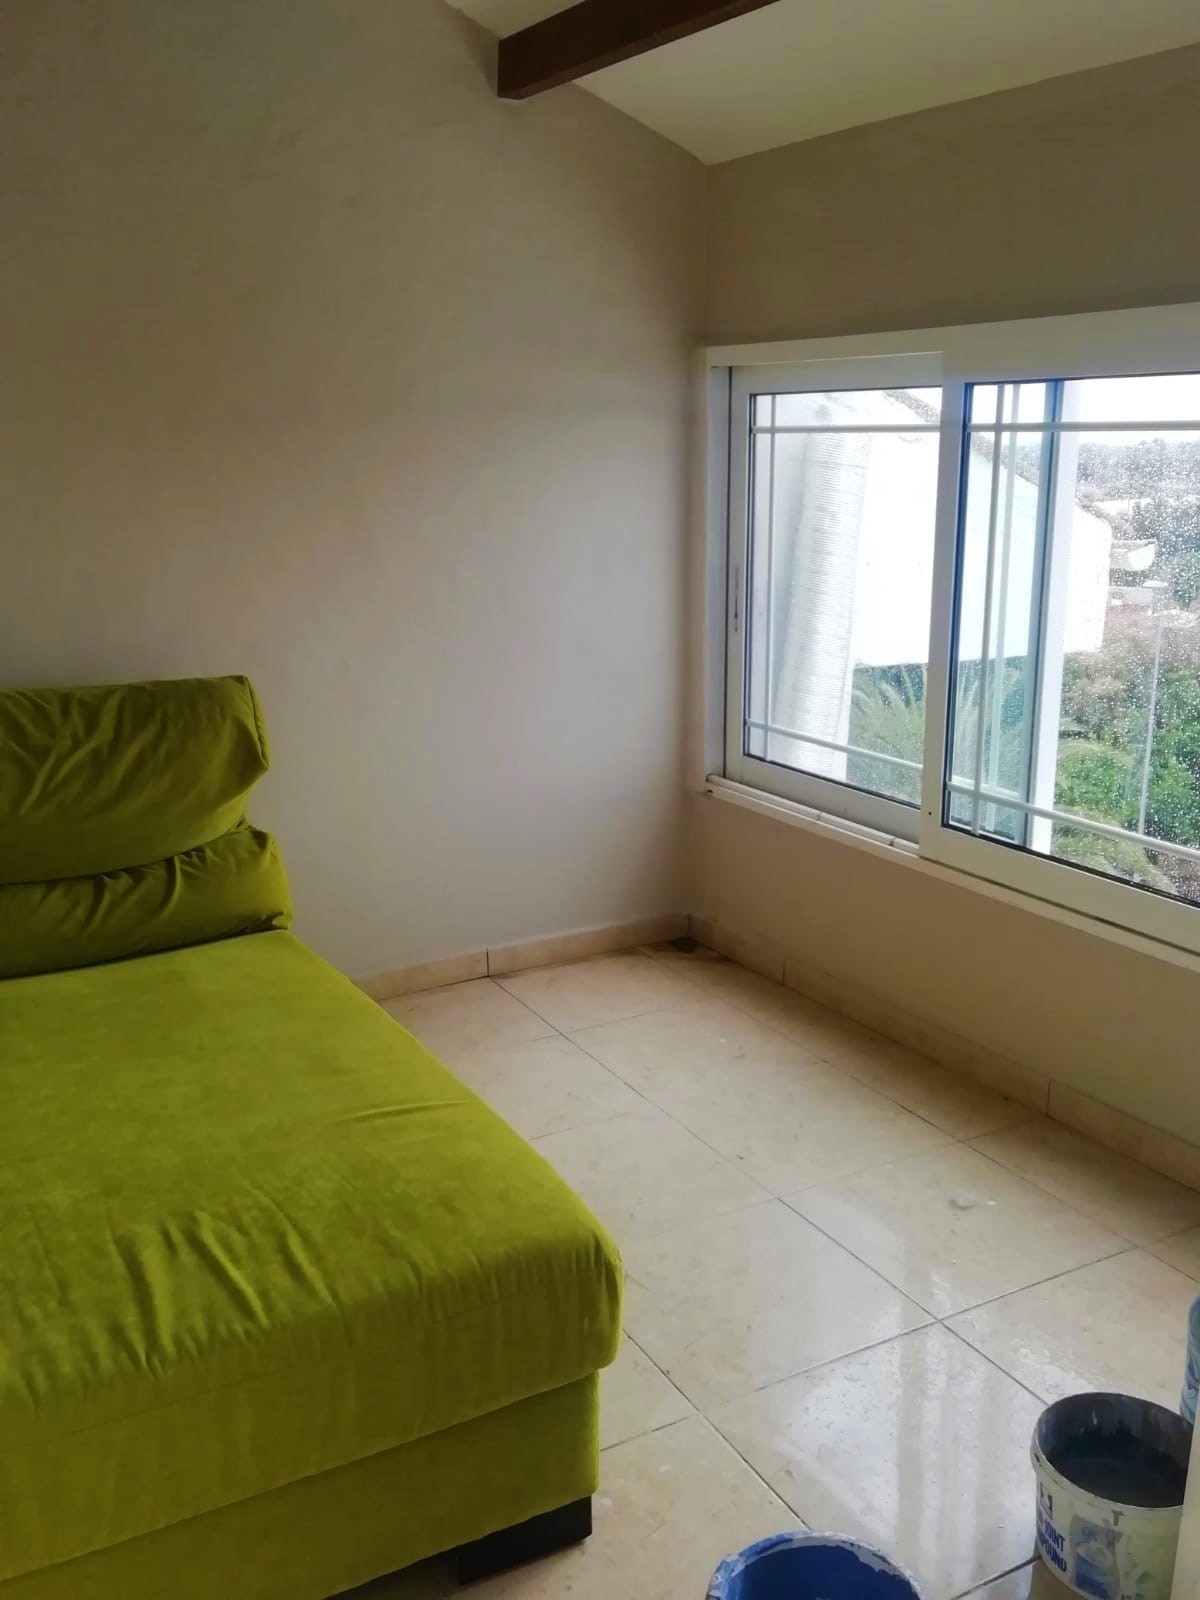 APARTMENT IN SAN FERNANDO FOR RENT